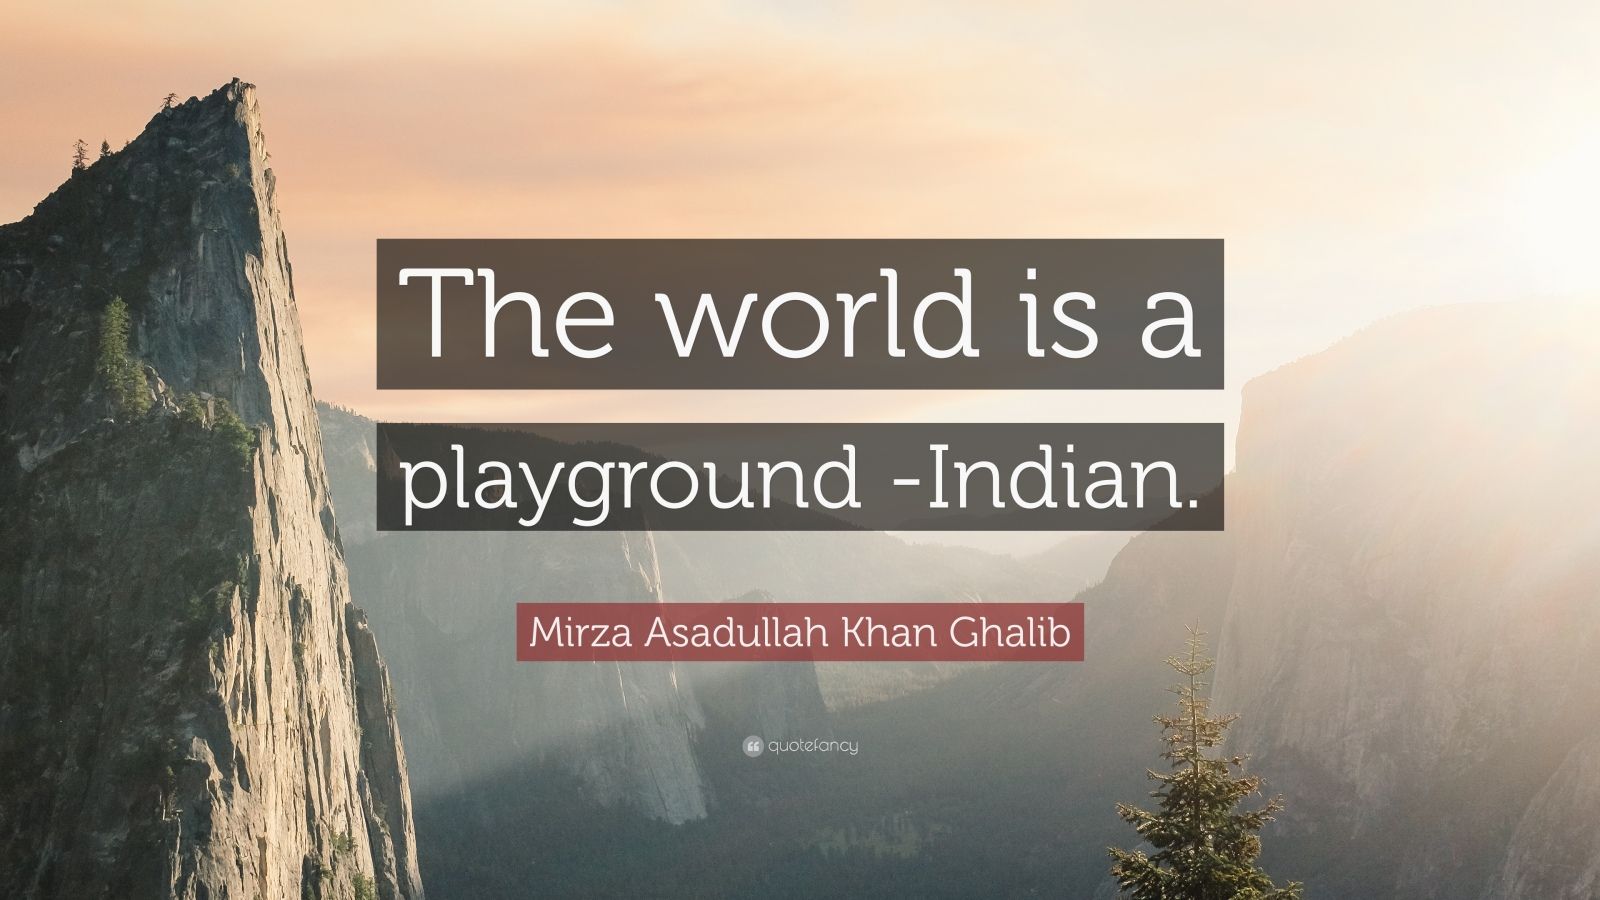 Mirza Asadullah Khan Ghalib Quote: "The world is a playground -Indian." (7 wallpapers) - Quotefancy